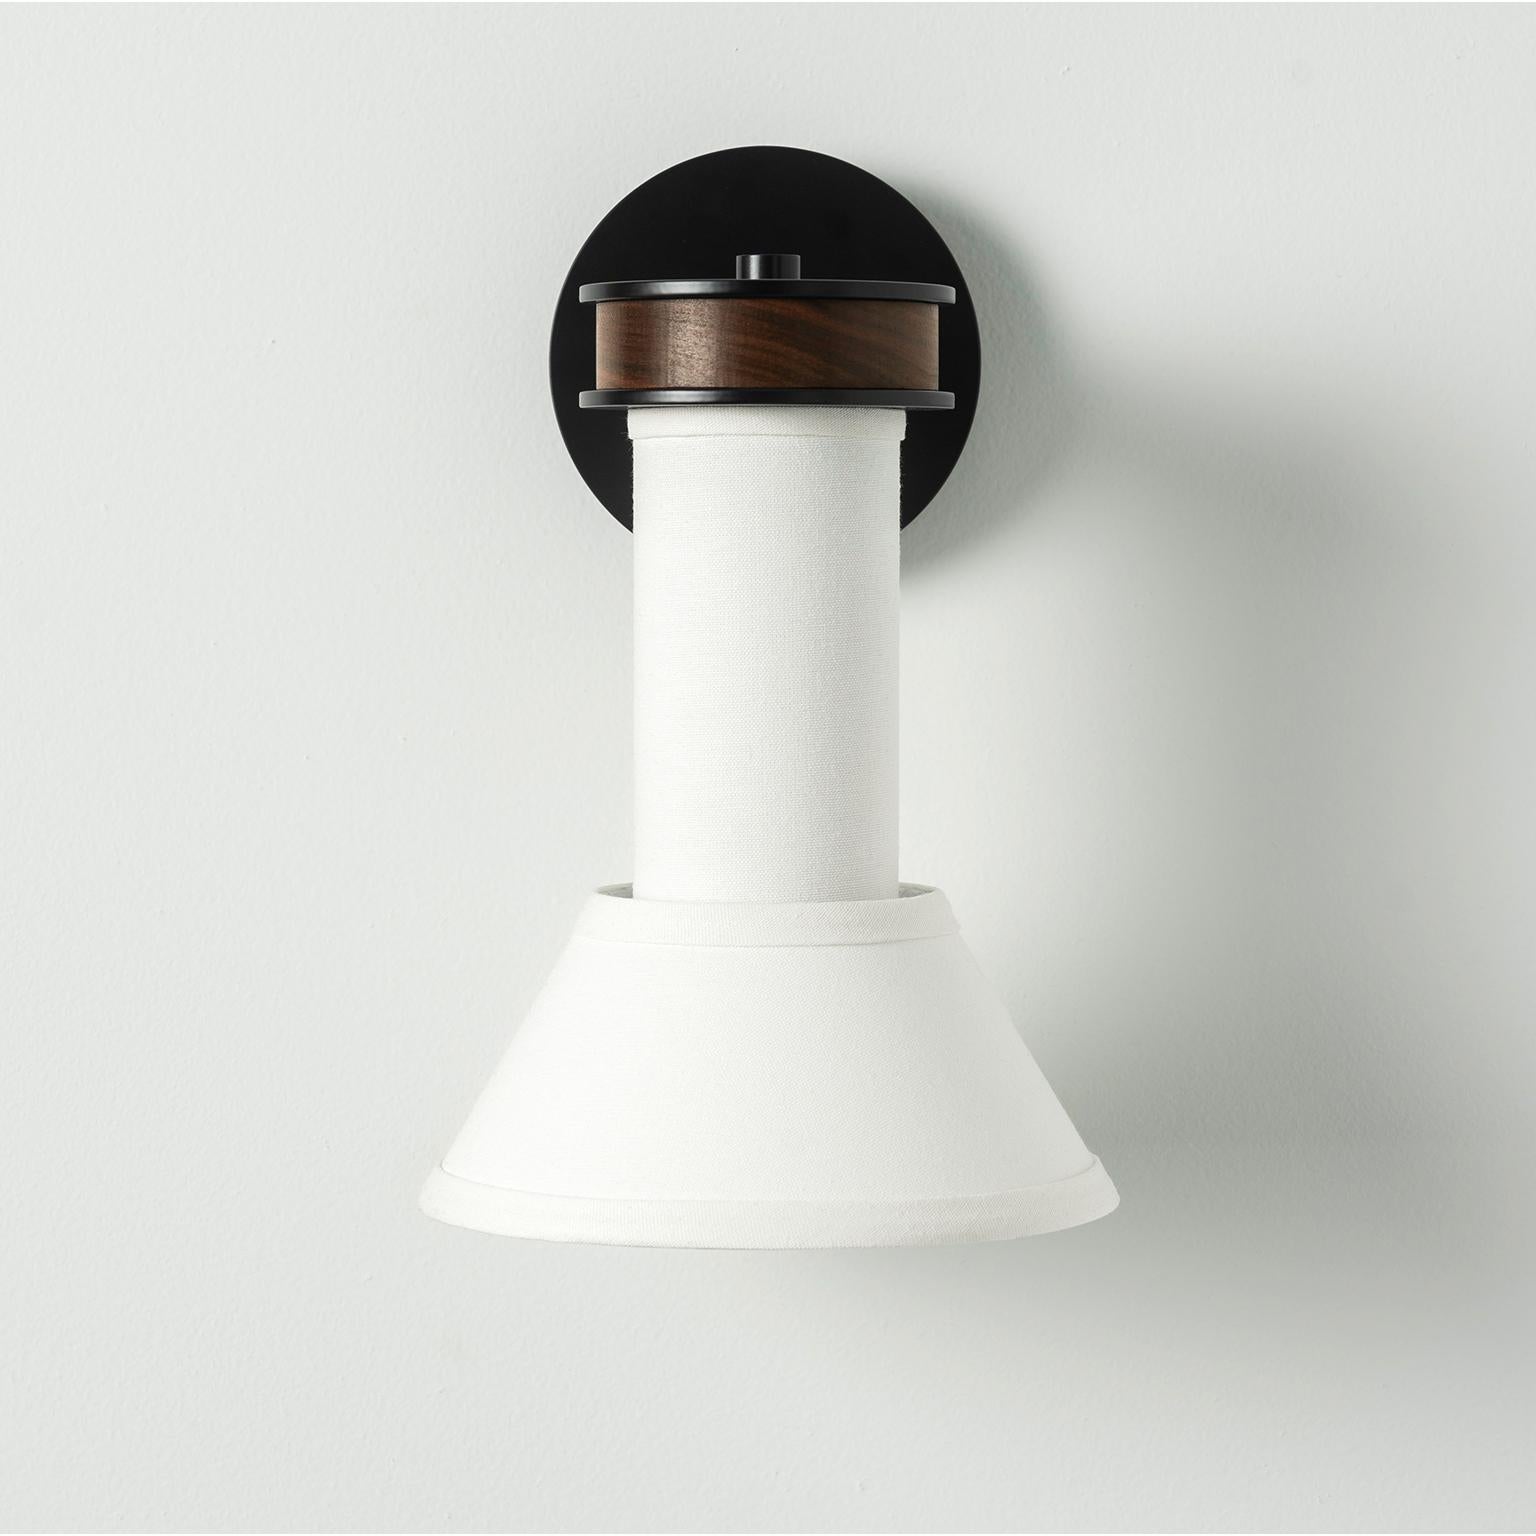 Our modern wall sconce combines symmetry and candle-like geometry to create a striking silhouette suitable for a variety of environments. A narrow shade and single column of luxurious linen descends from a curved hardwood base casting a tranquil